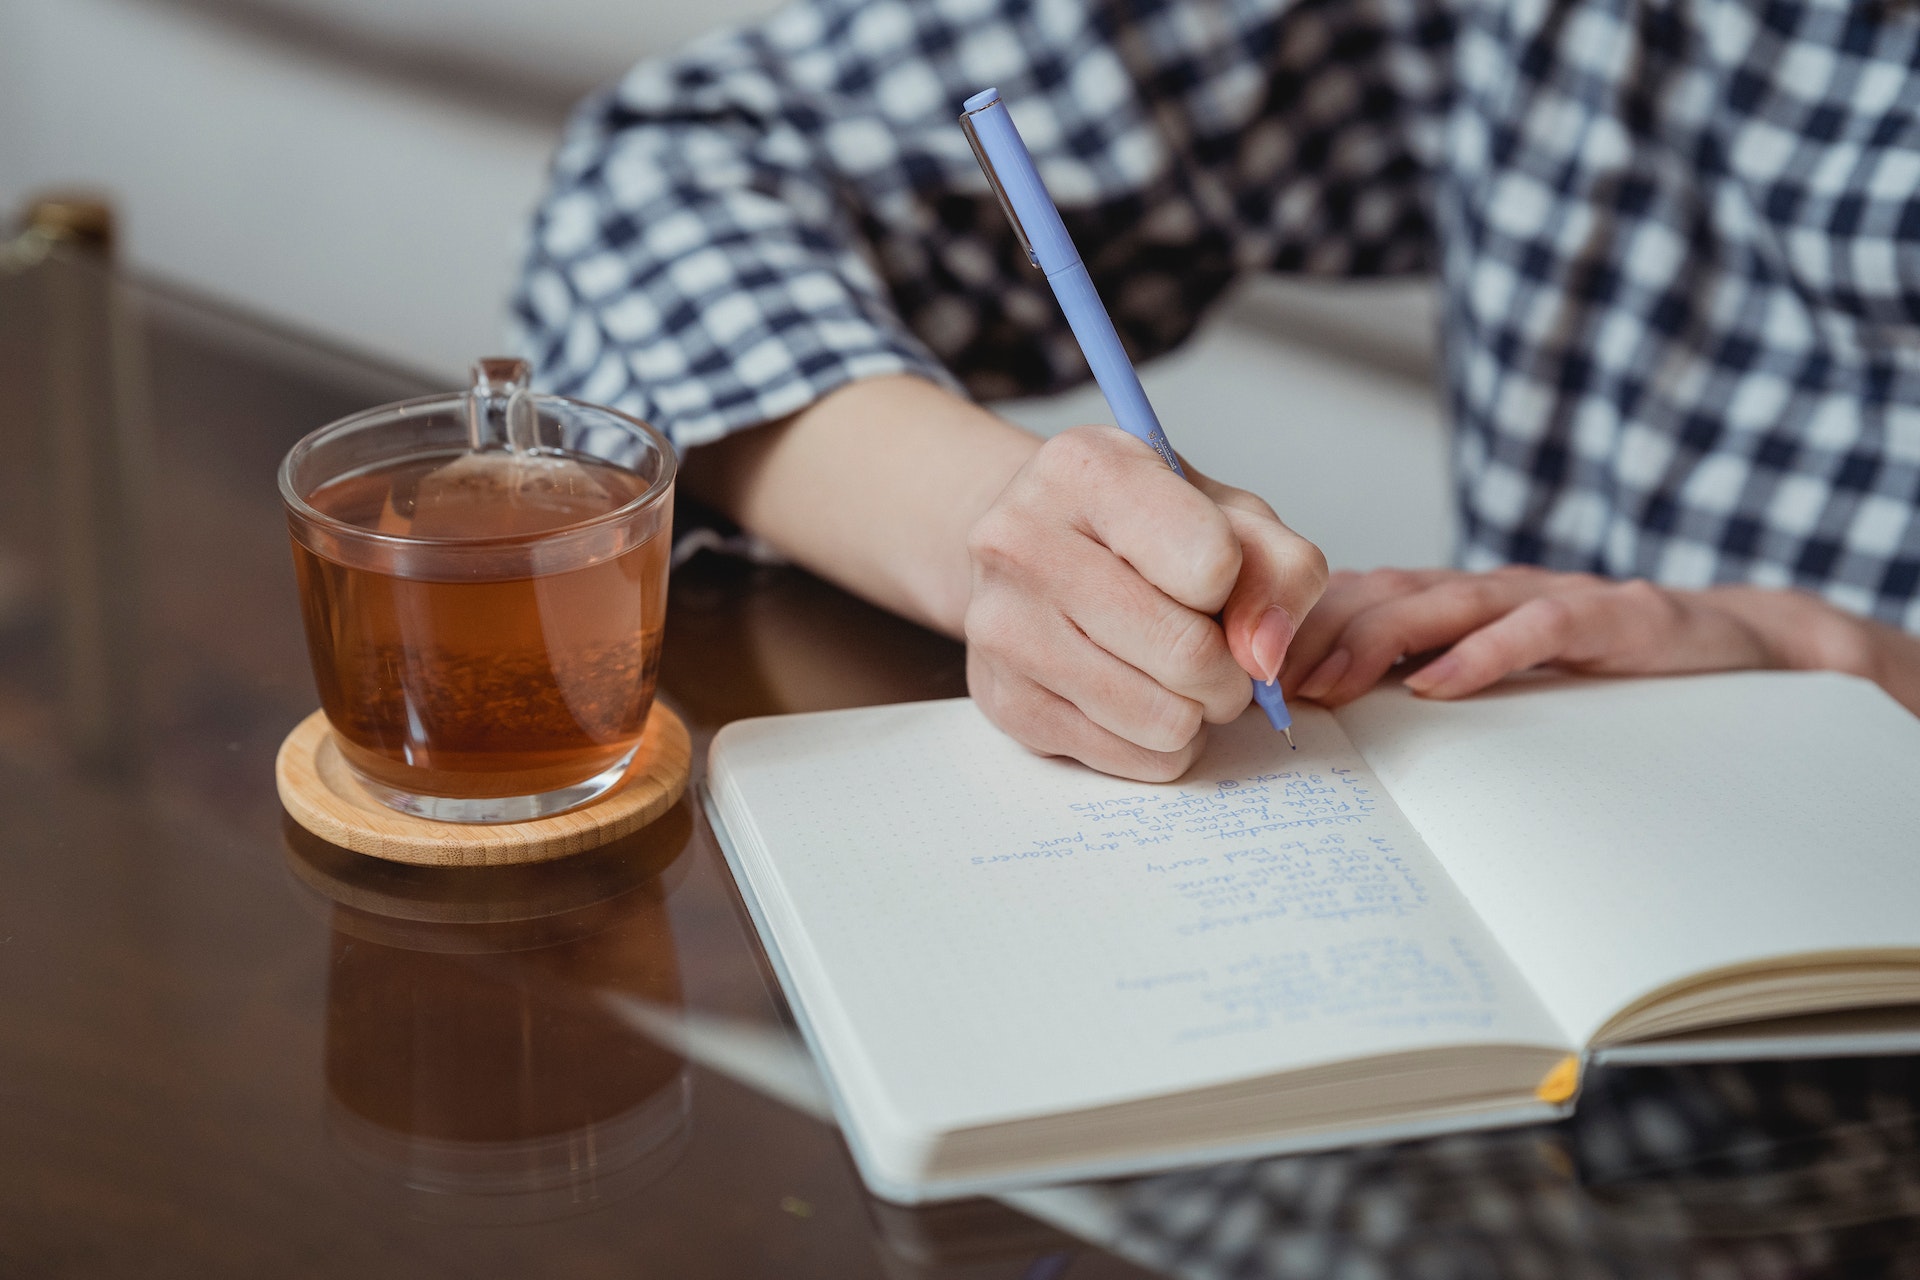 A scene of reflective journaling with a notebook and cup of tea